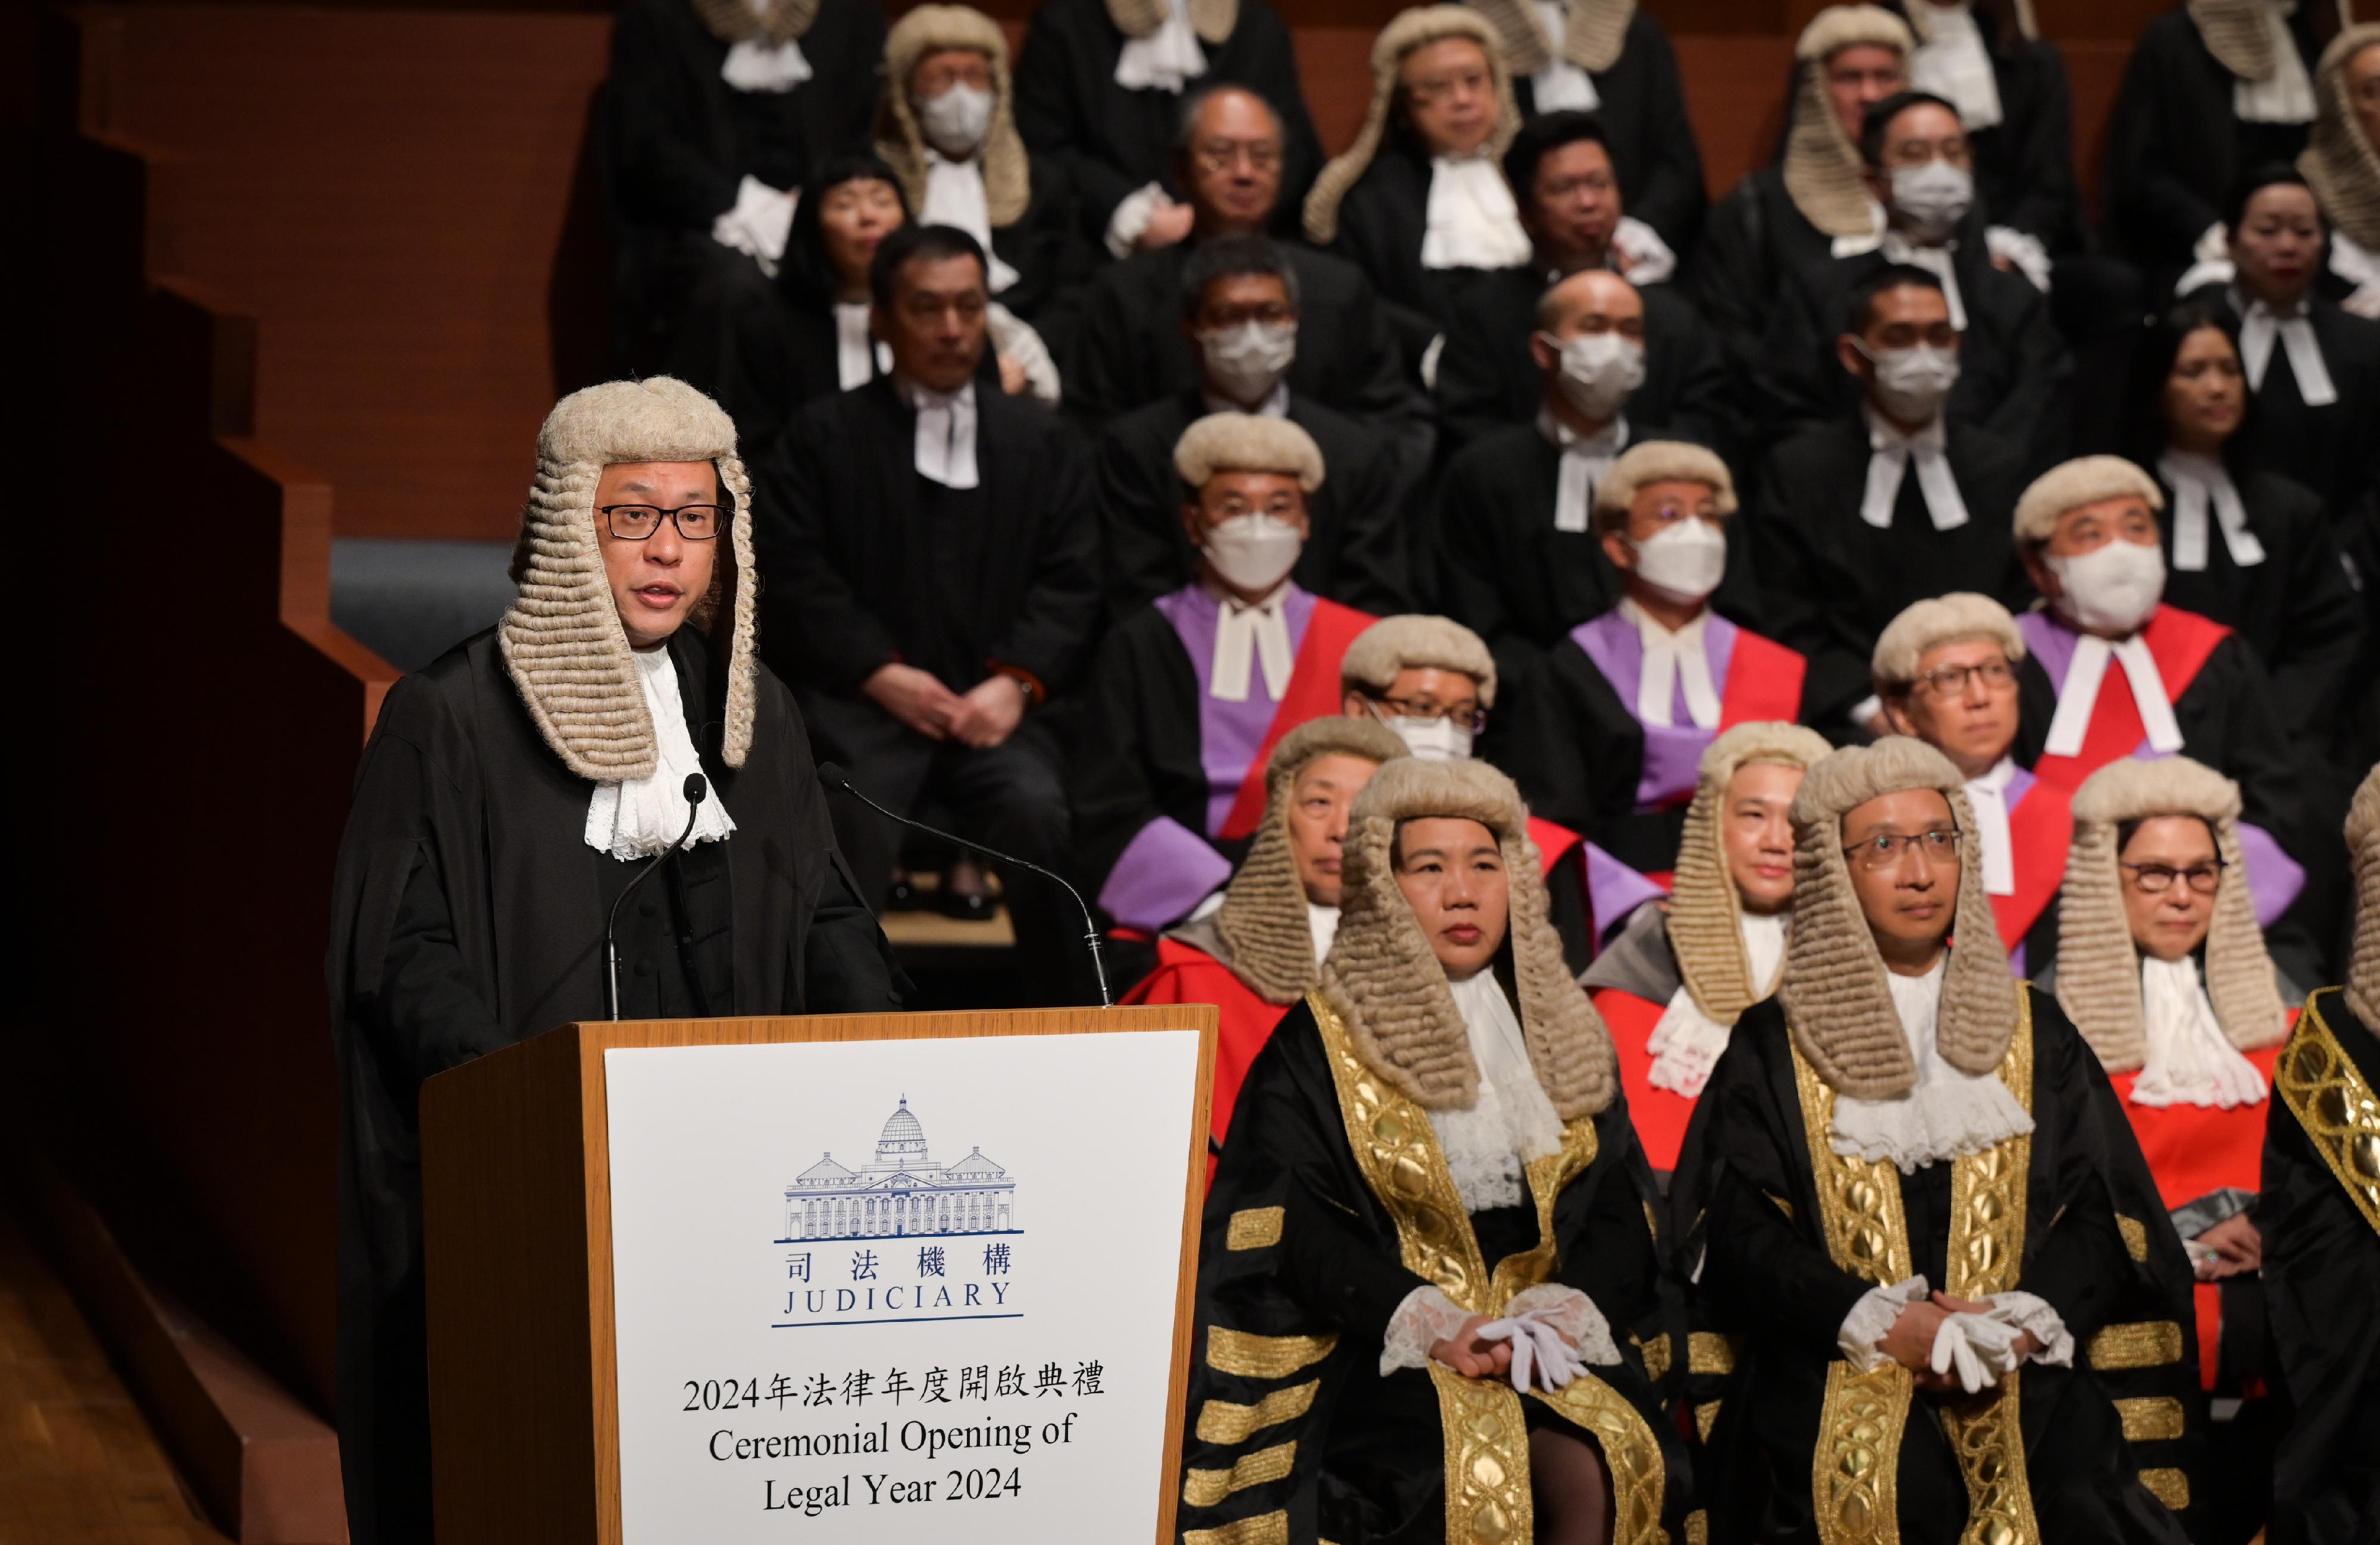 The Chairman of the Hong Kong Bar Association, Mr Victor Dawes, SC, today (January 22) gives an address at the Ceremonial Opening of the Legal Year 2024.
